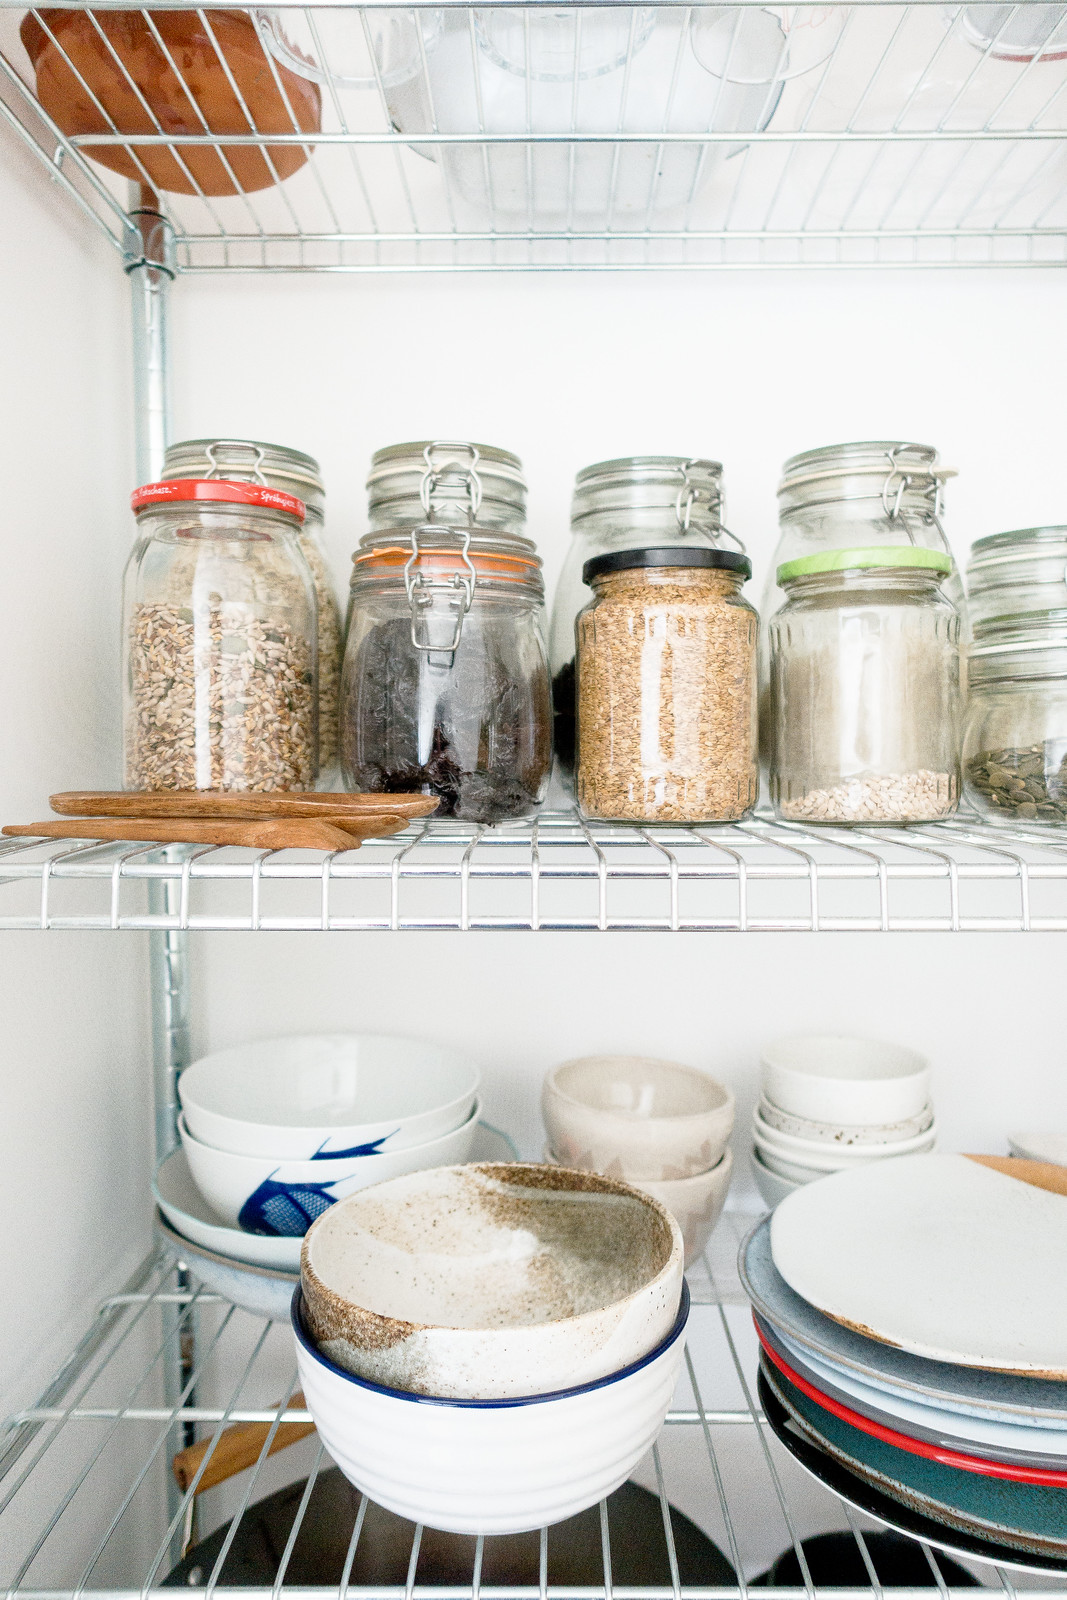 The Vegan Pantry: Essential Food Staples For A Plant-Based Kitchen